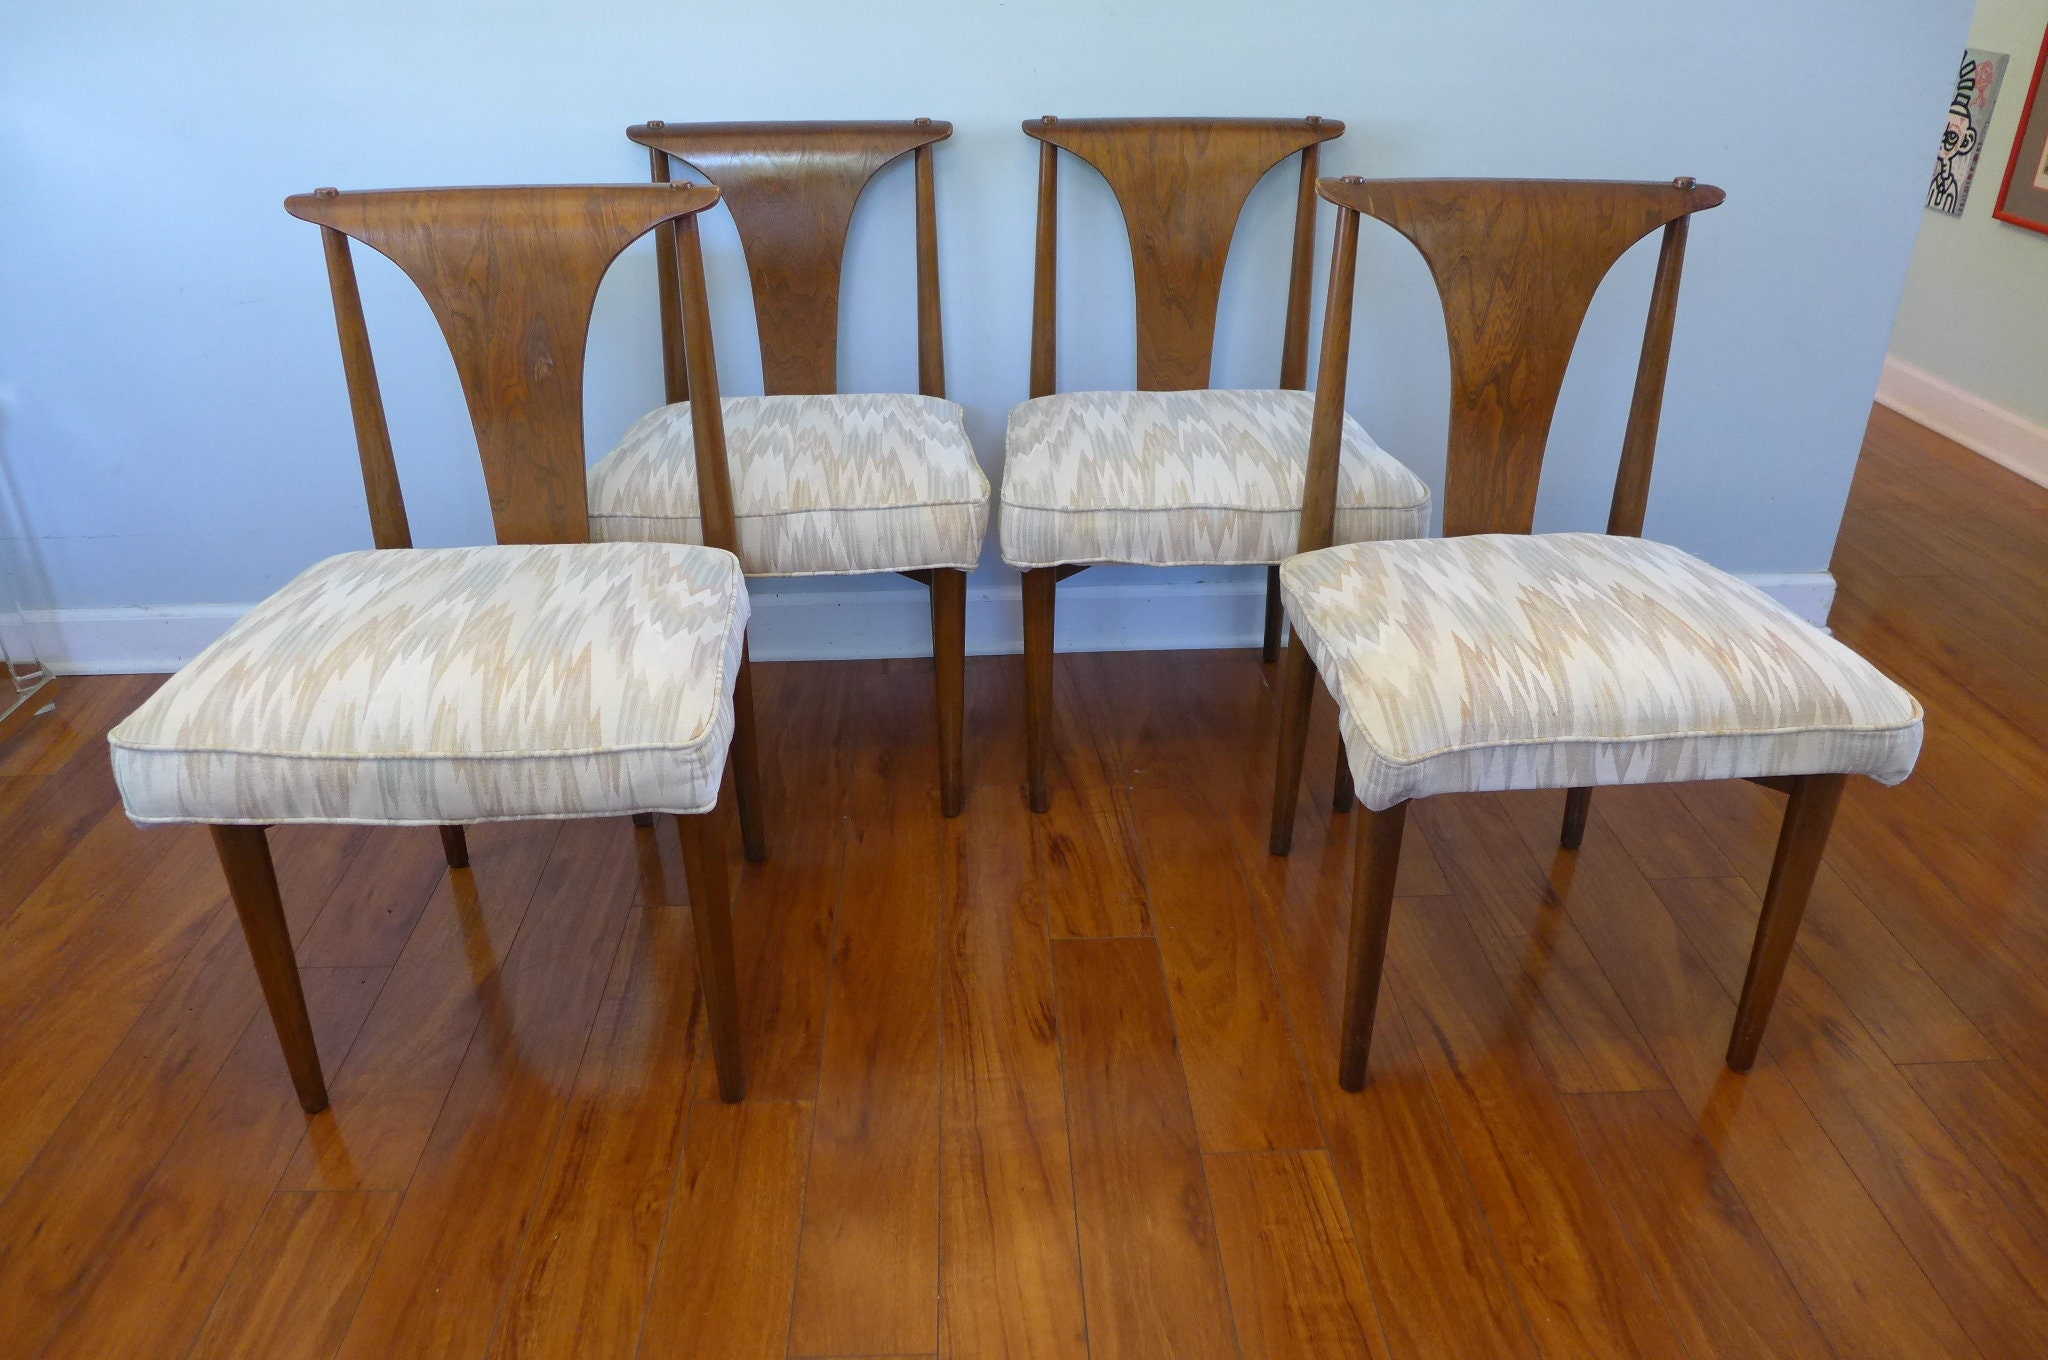 Ethan Allen 'Parker' Chairs in a berry color flame stitch fabric